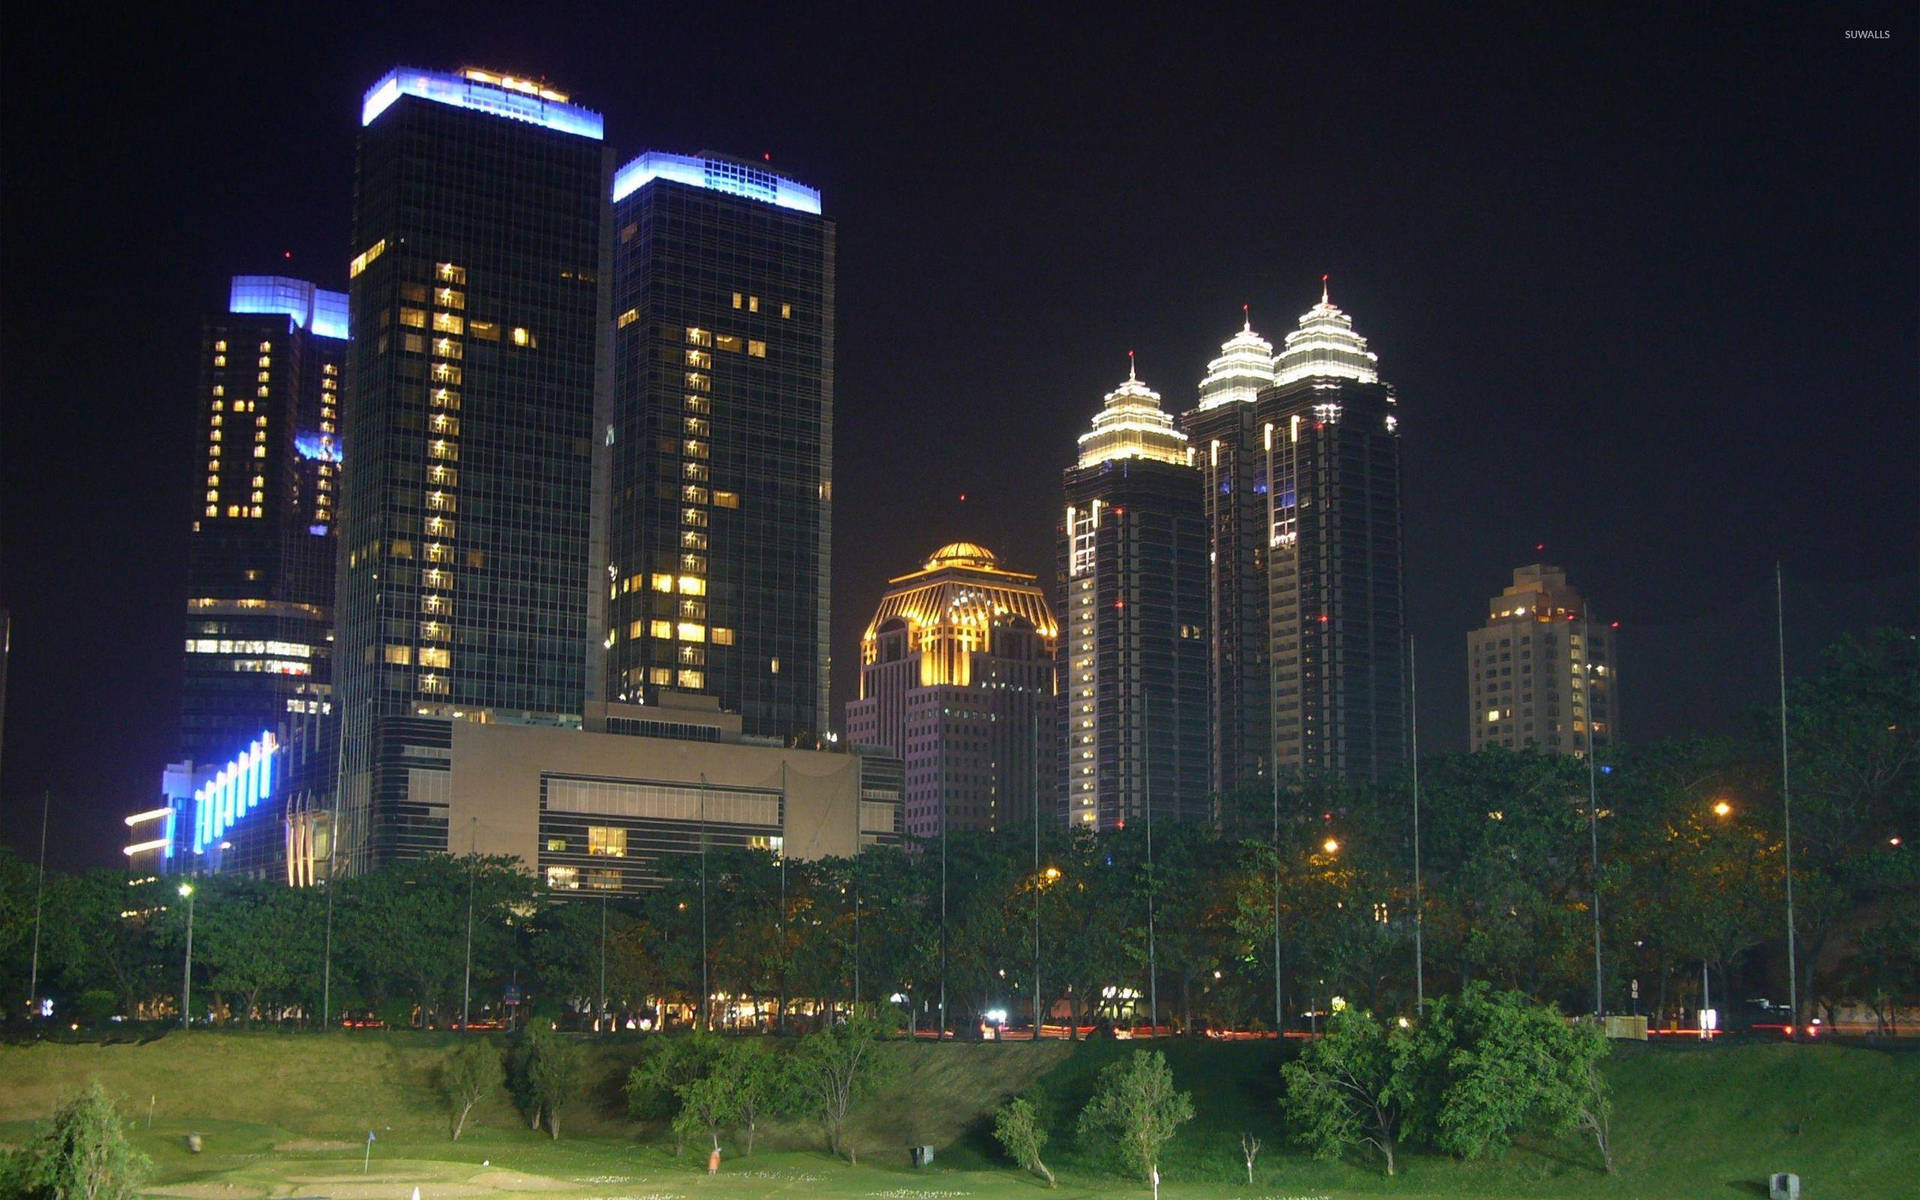 Jakartapacific Place Is A Famous Shopping Mall And Office Building Located In Jakarta, Indonesia. Wallpaper